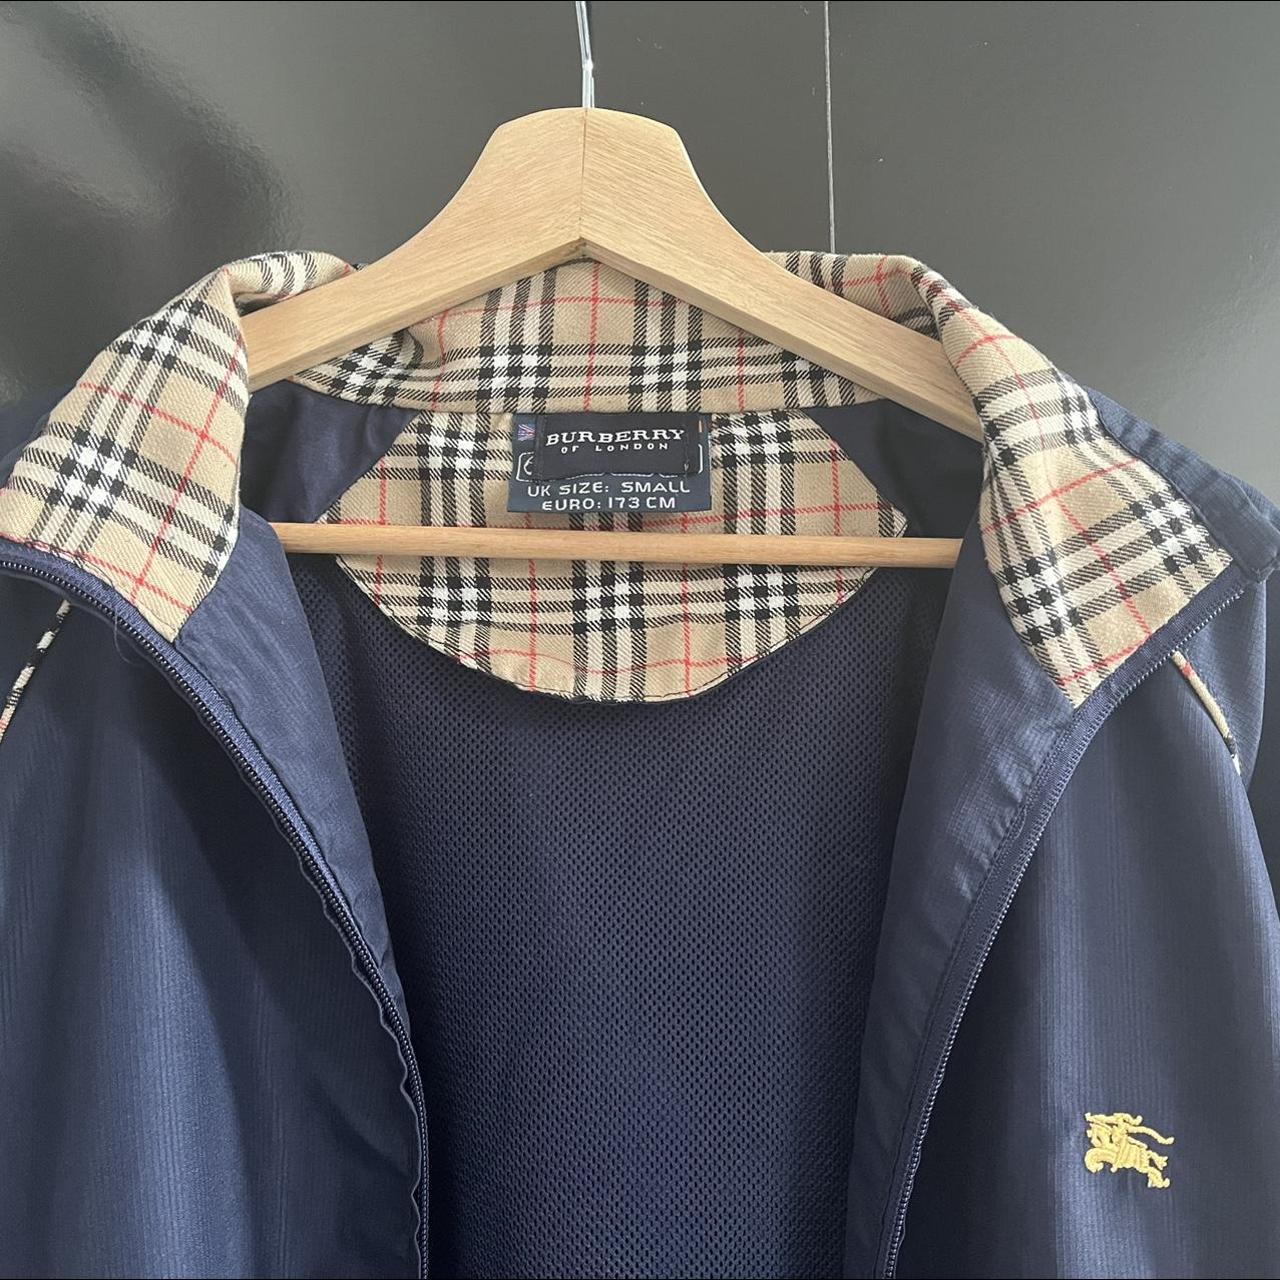 Vintage Burberry jacket, Only worn twice, Size S.